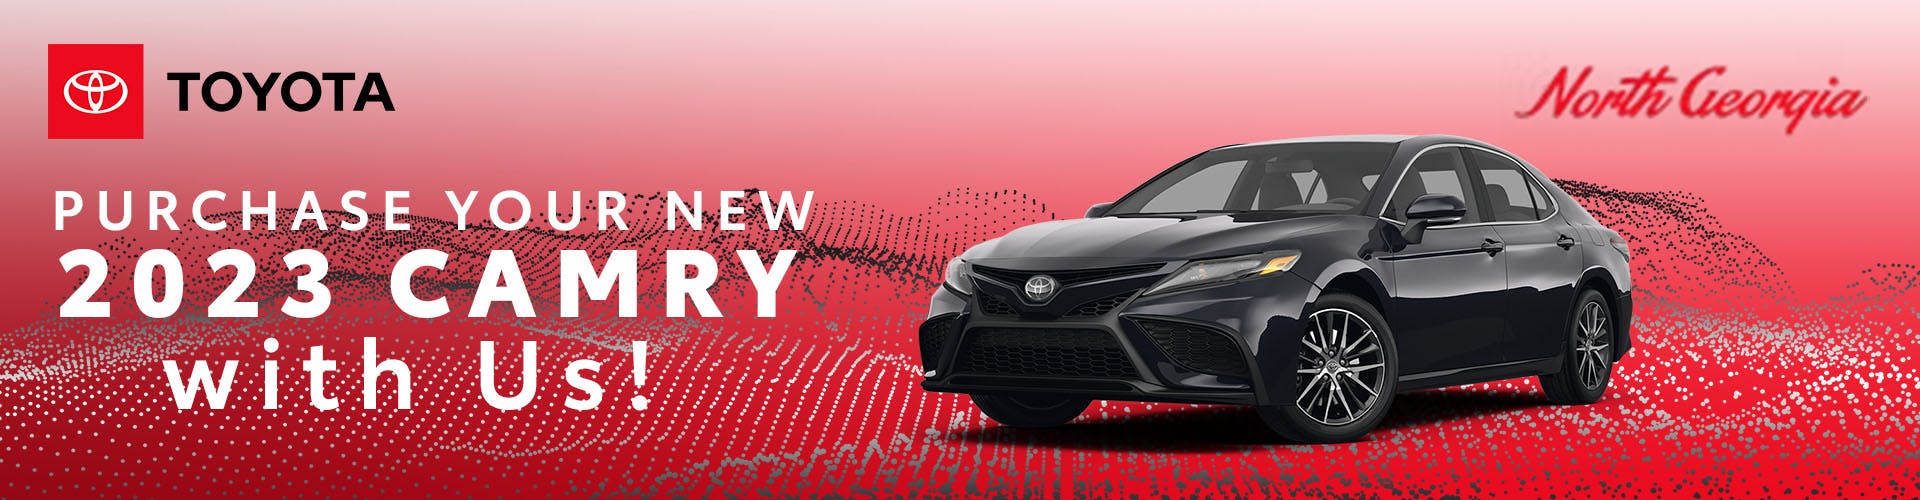 3Toyota Camry Offer